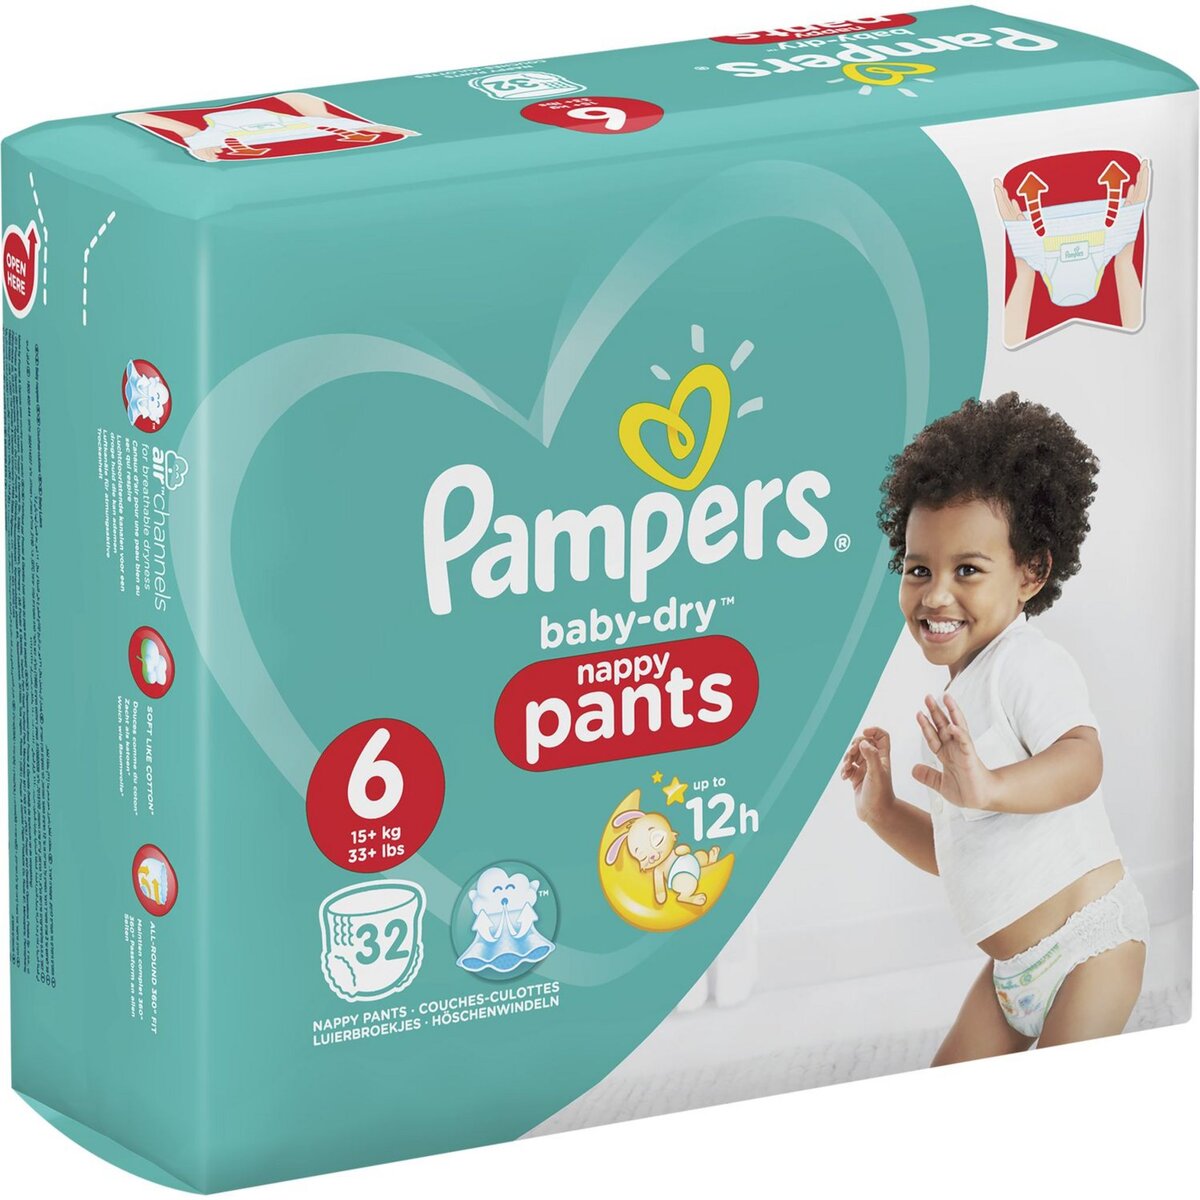 PAMPERS Baby-dry pants couches-culottes taille 6 (+15kg) 32 couches